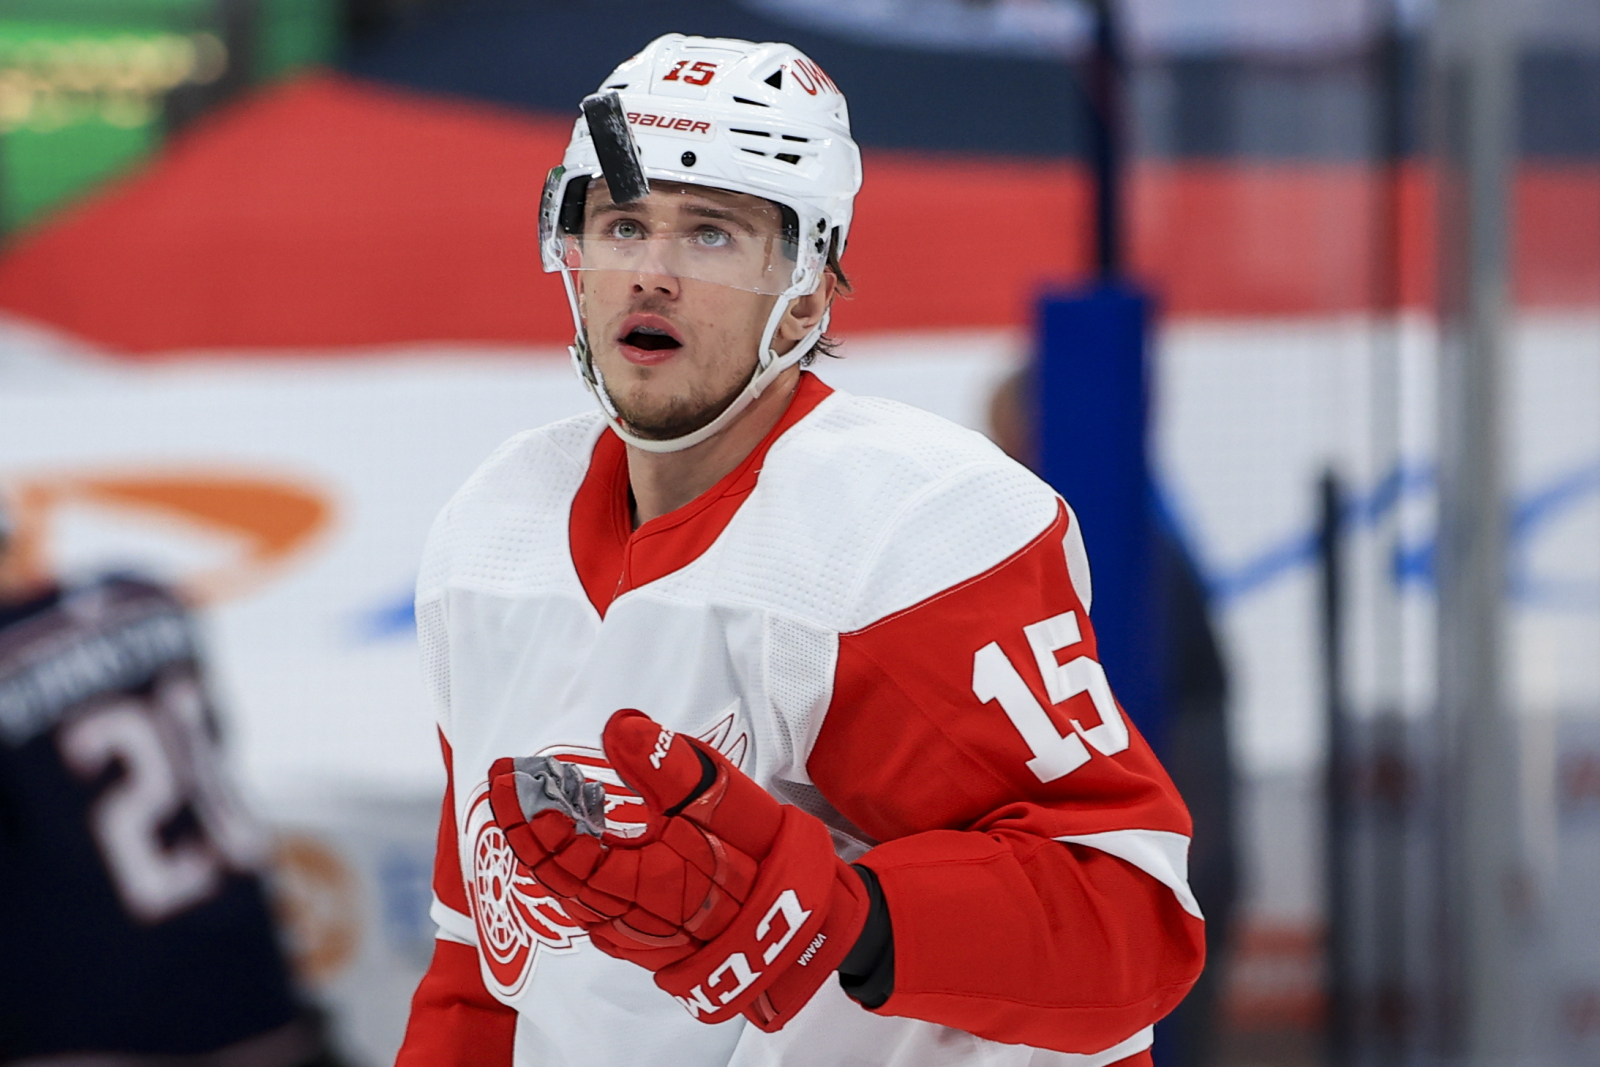 Jakub Vrana could return to lineup as Wings head into crucial game